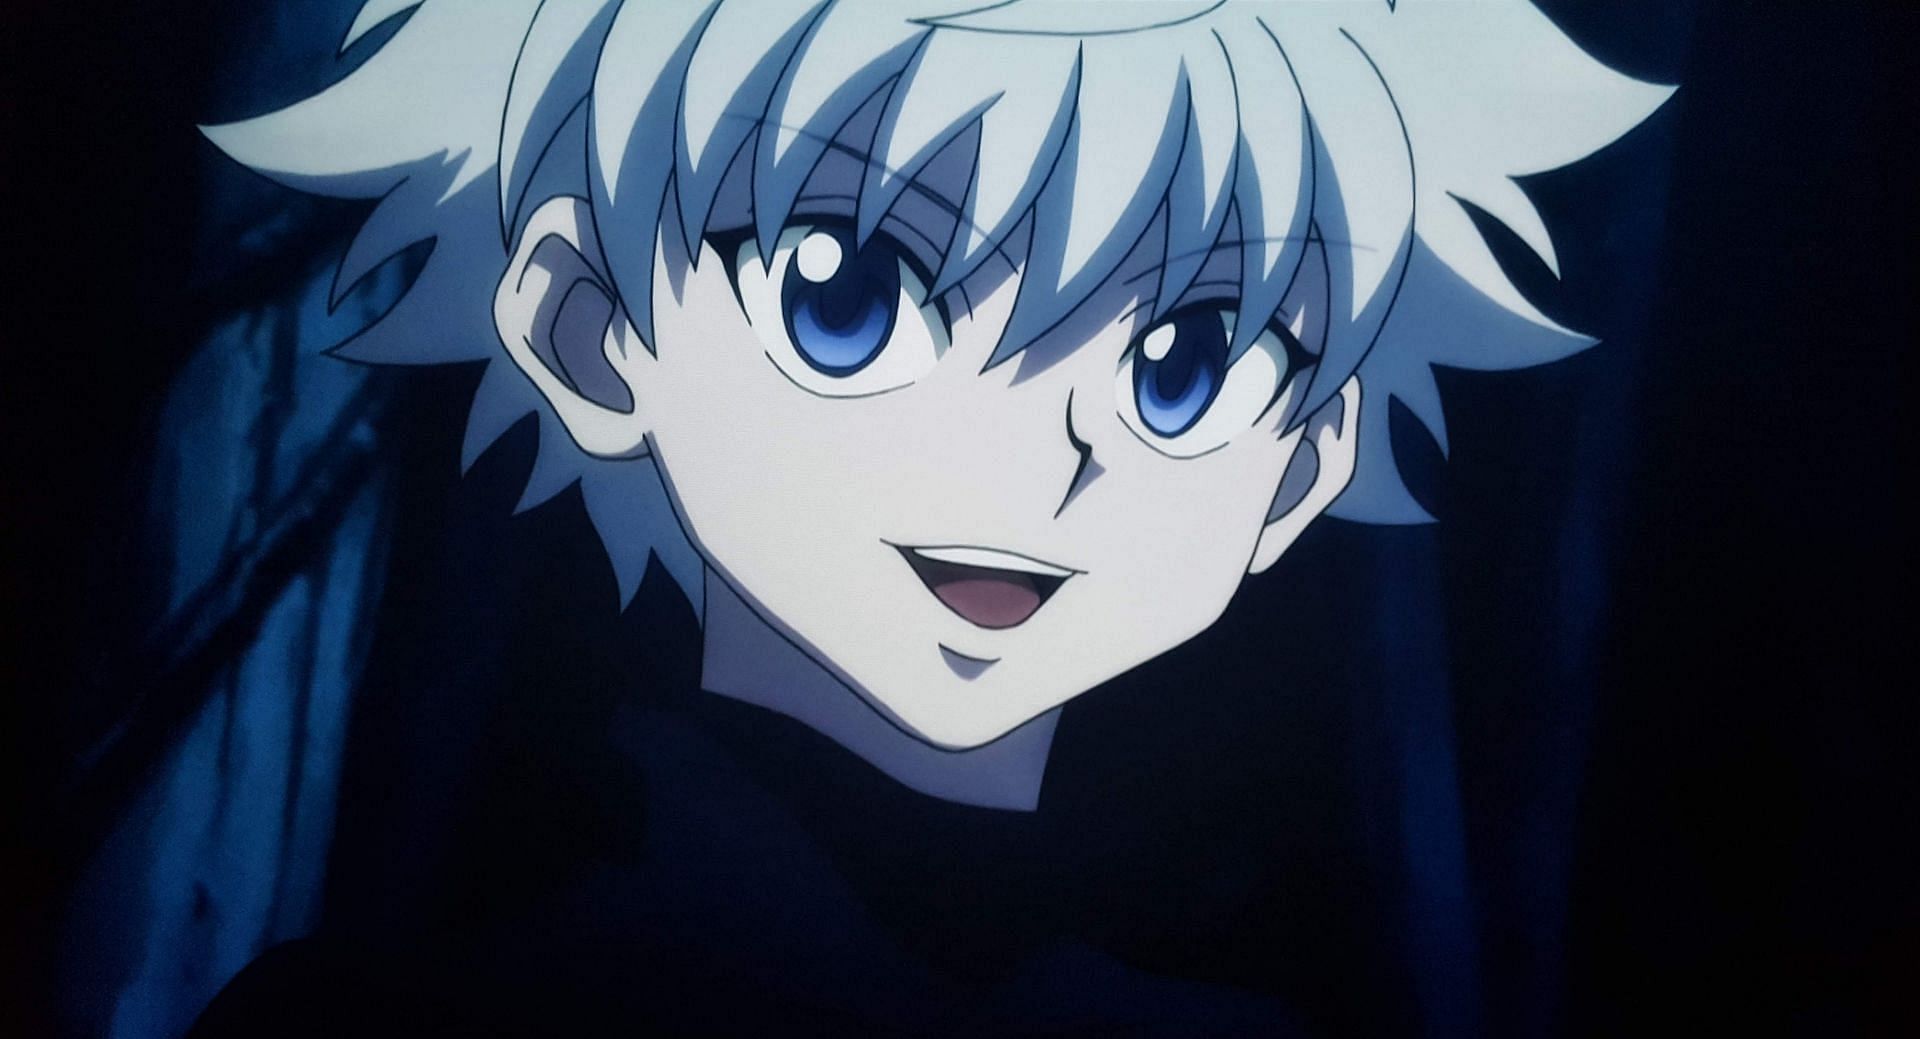 Killua is the most liked character in Hunter x Hunter (Image via Madhouse)